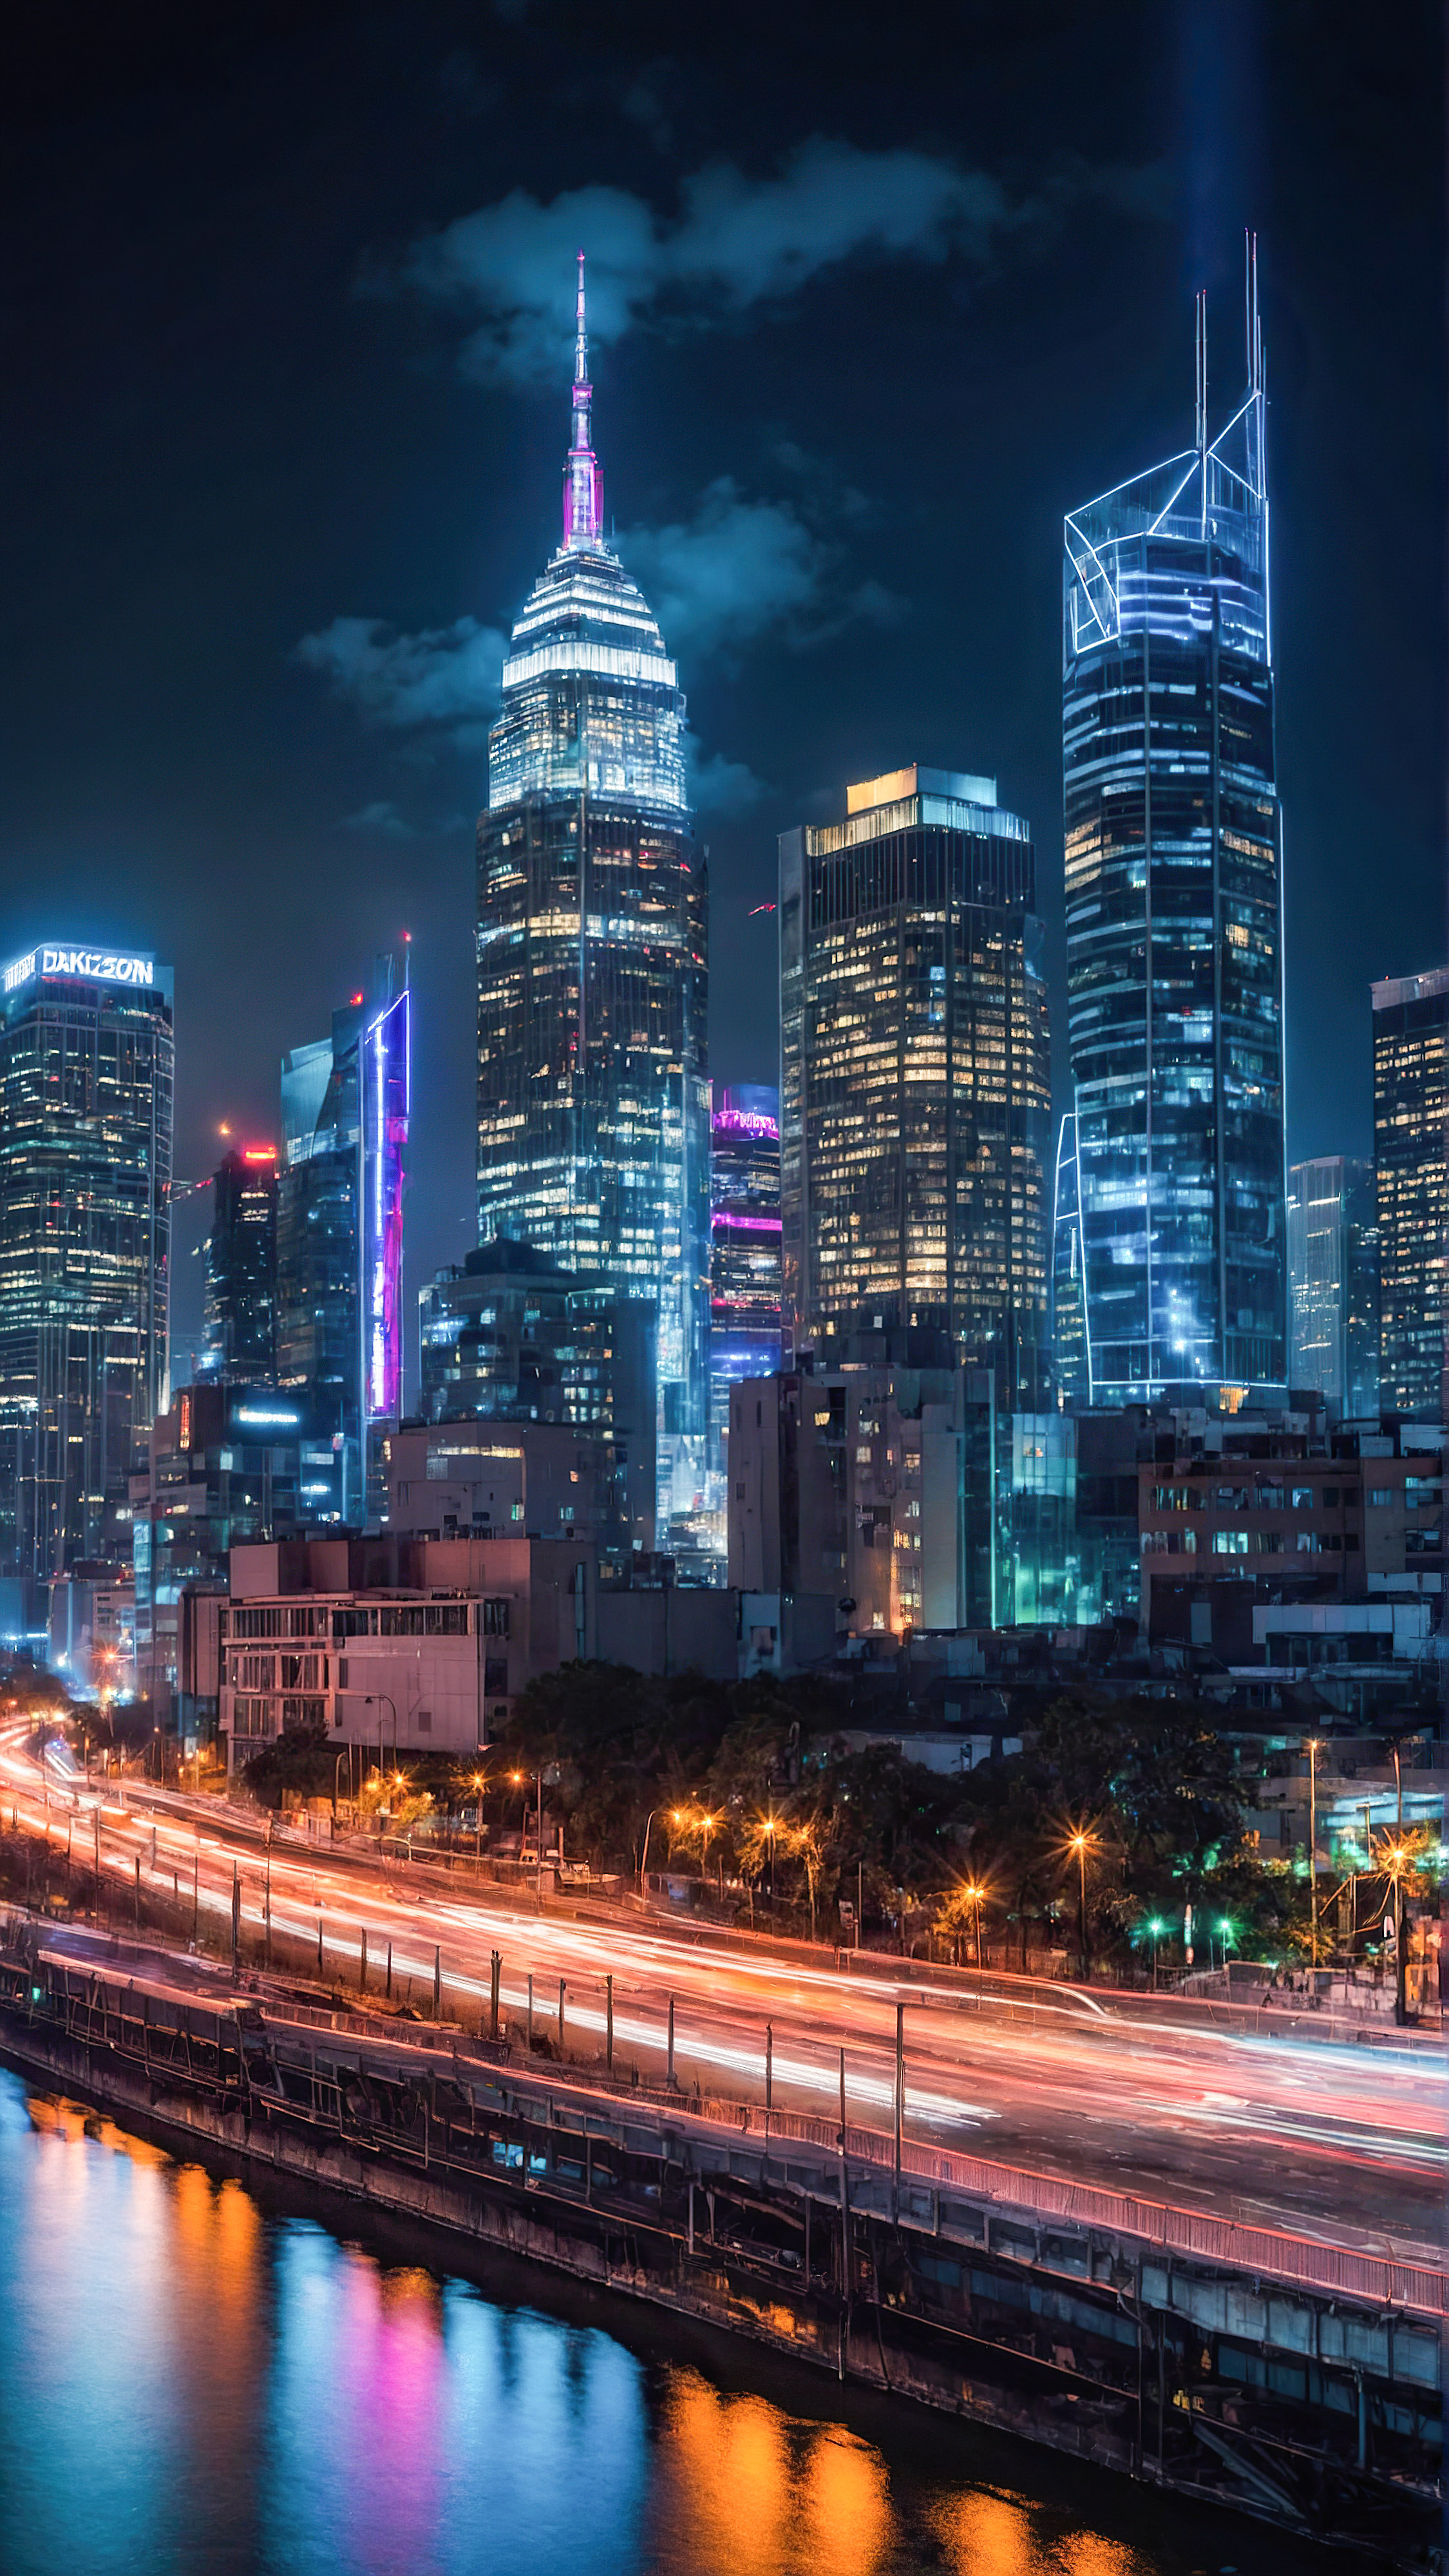 Get lost in the magic of our 4K background for iPhone, capturing a bustling city at night where bright neon lights from towering skyscrapers cast colorful reflections on the wet city streets below.